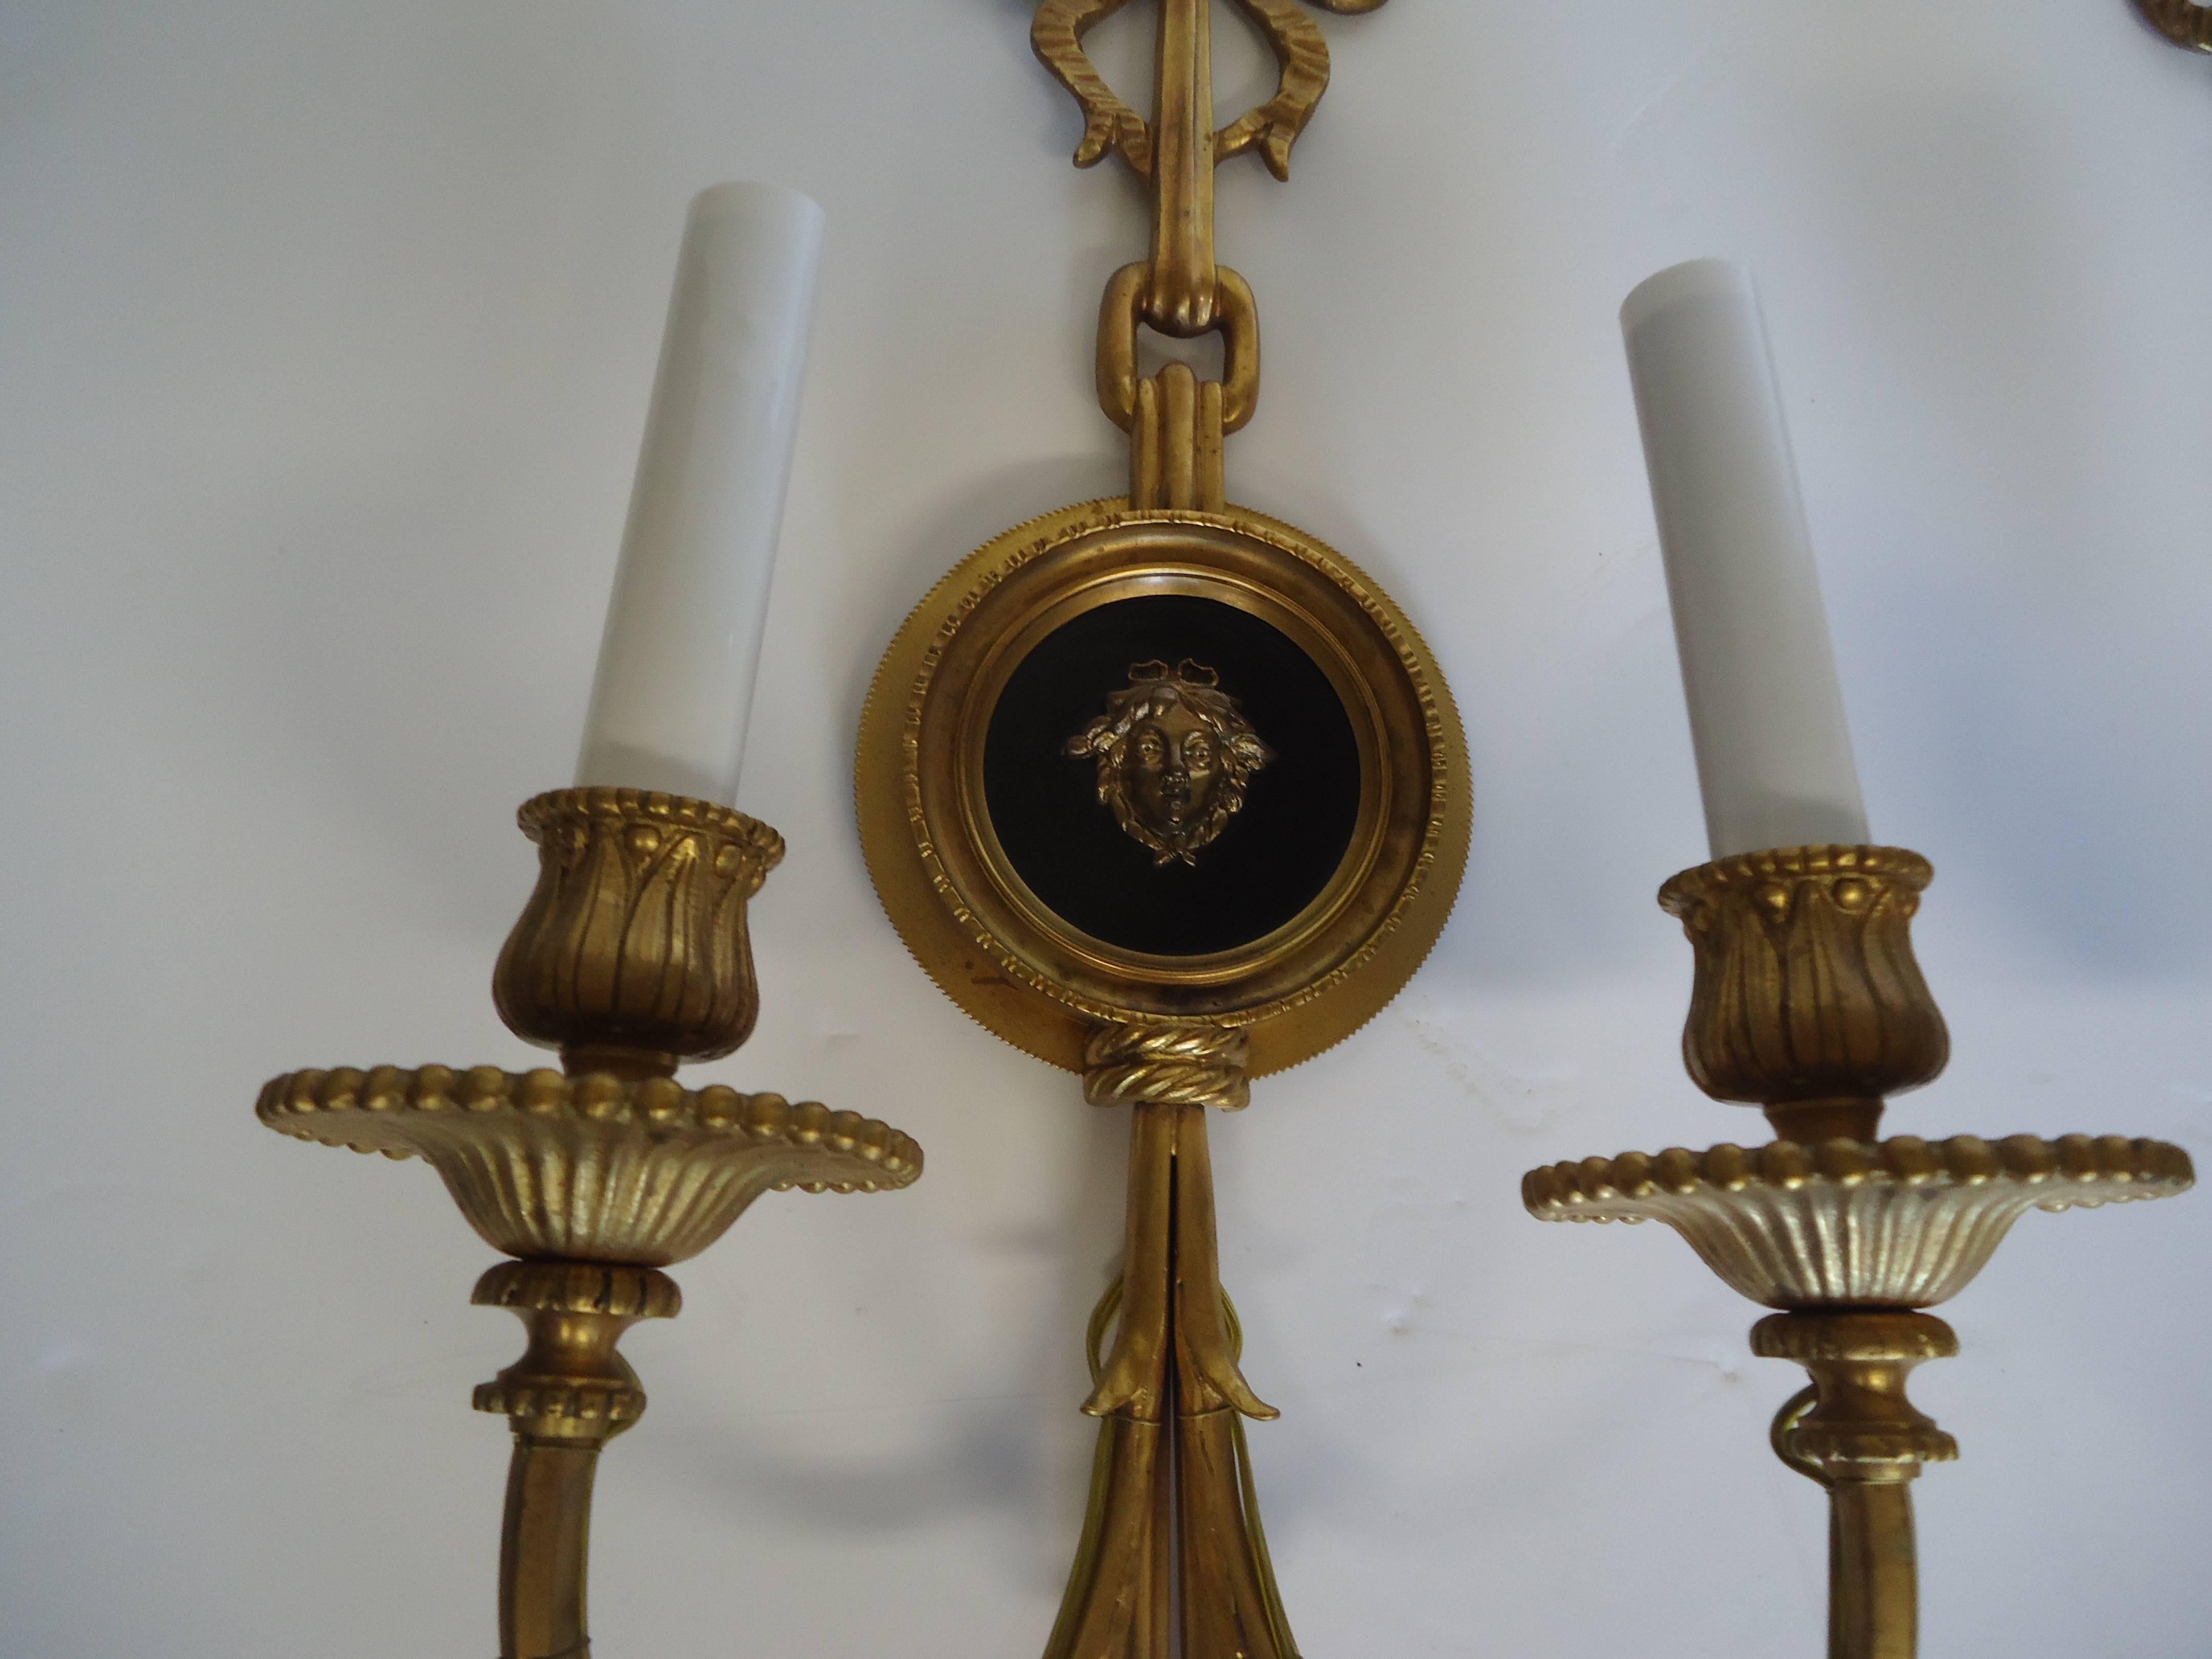 Lovely pair of bronze sconces with central Versace style medallions with nymph like faces against ebonized background, bows at the tops and tassels at the bottom, two arms with 60 watts each.